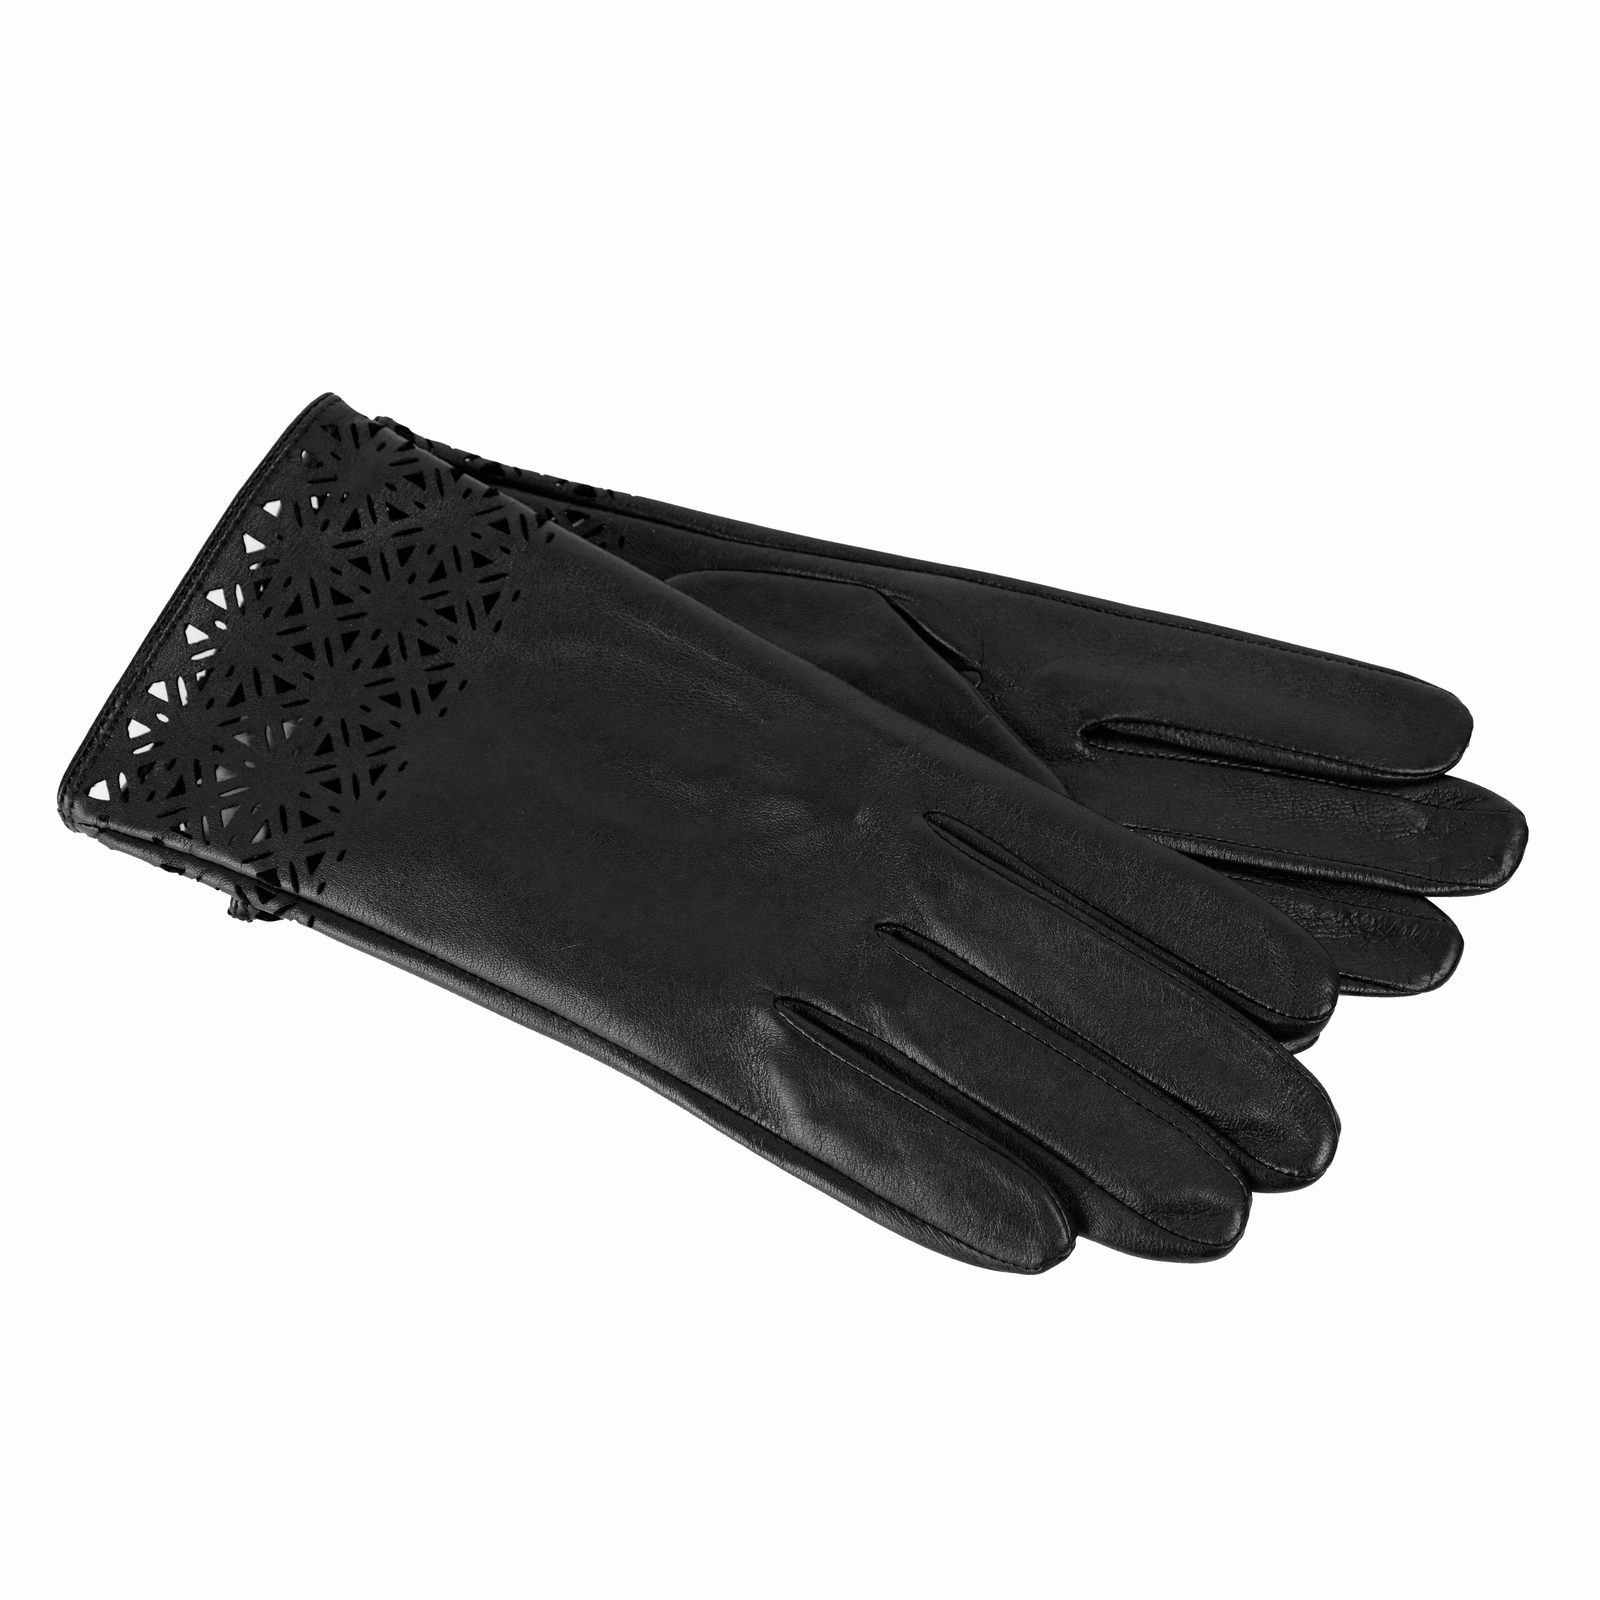 DENTS Premium Quality Unlined Womens Genuine Leather Gloves 77-0006 | eBay